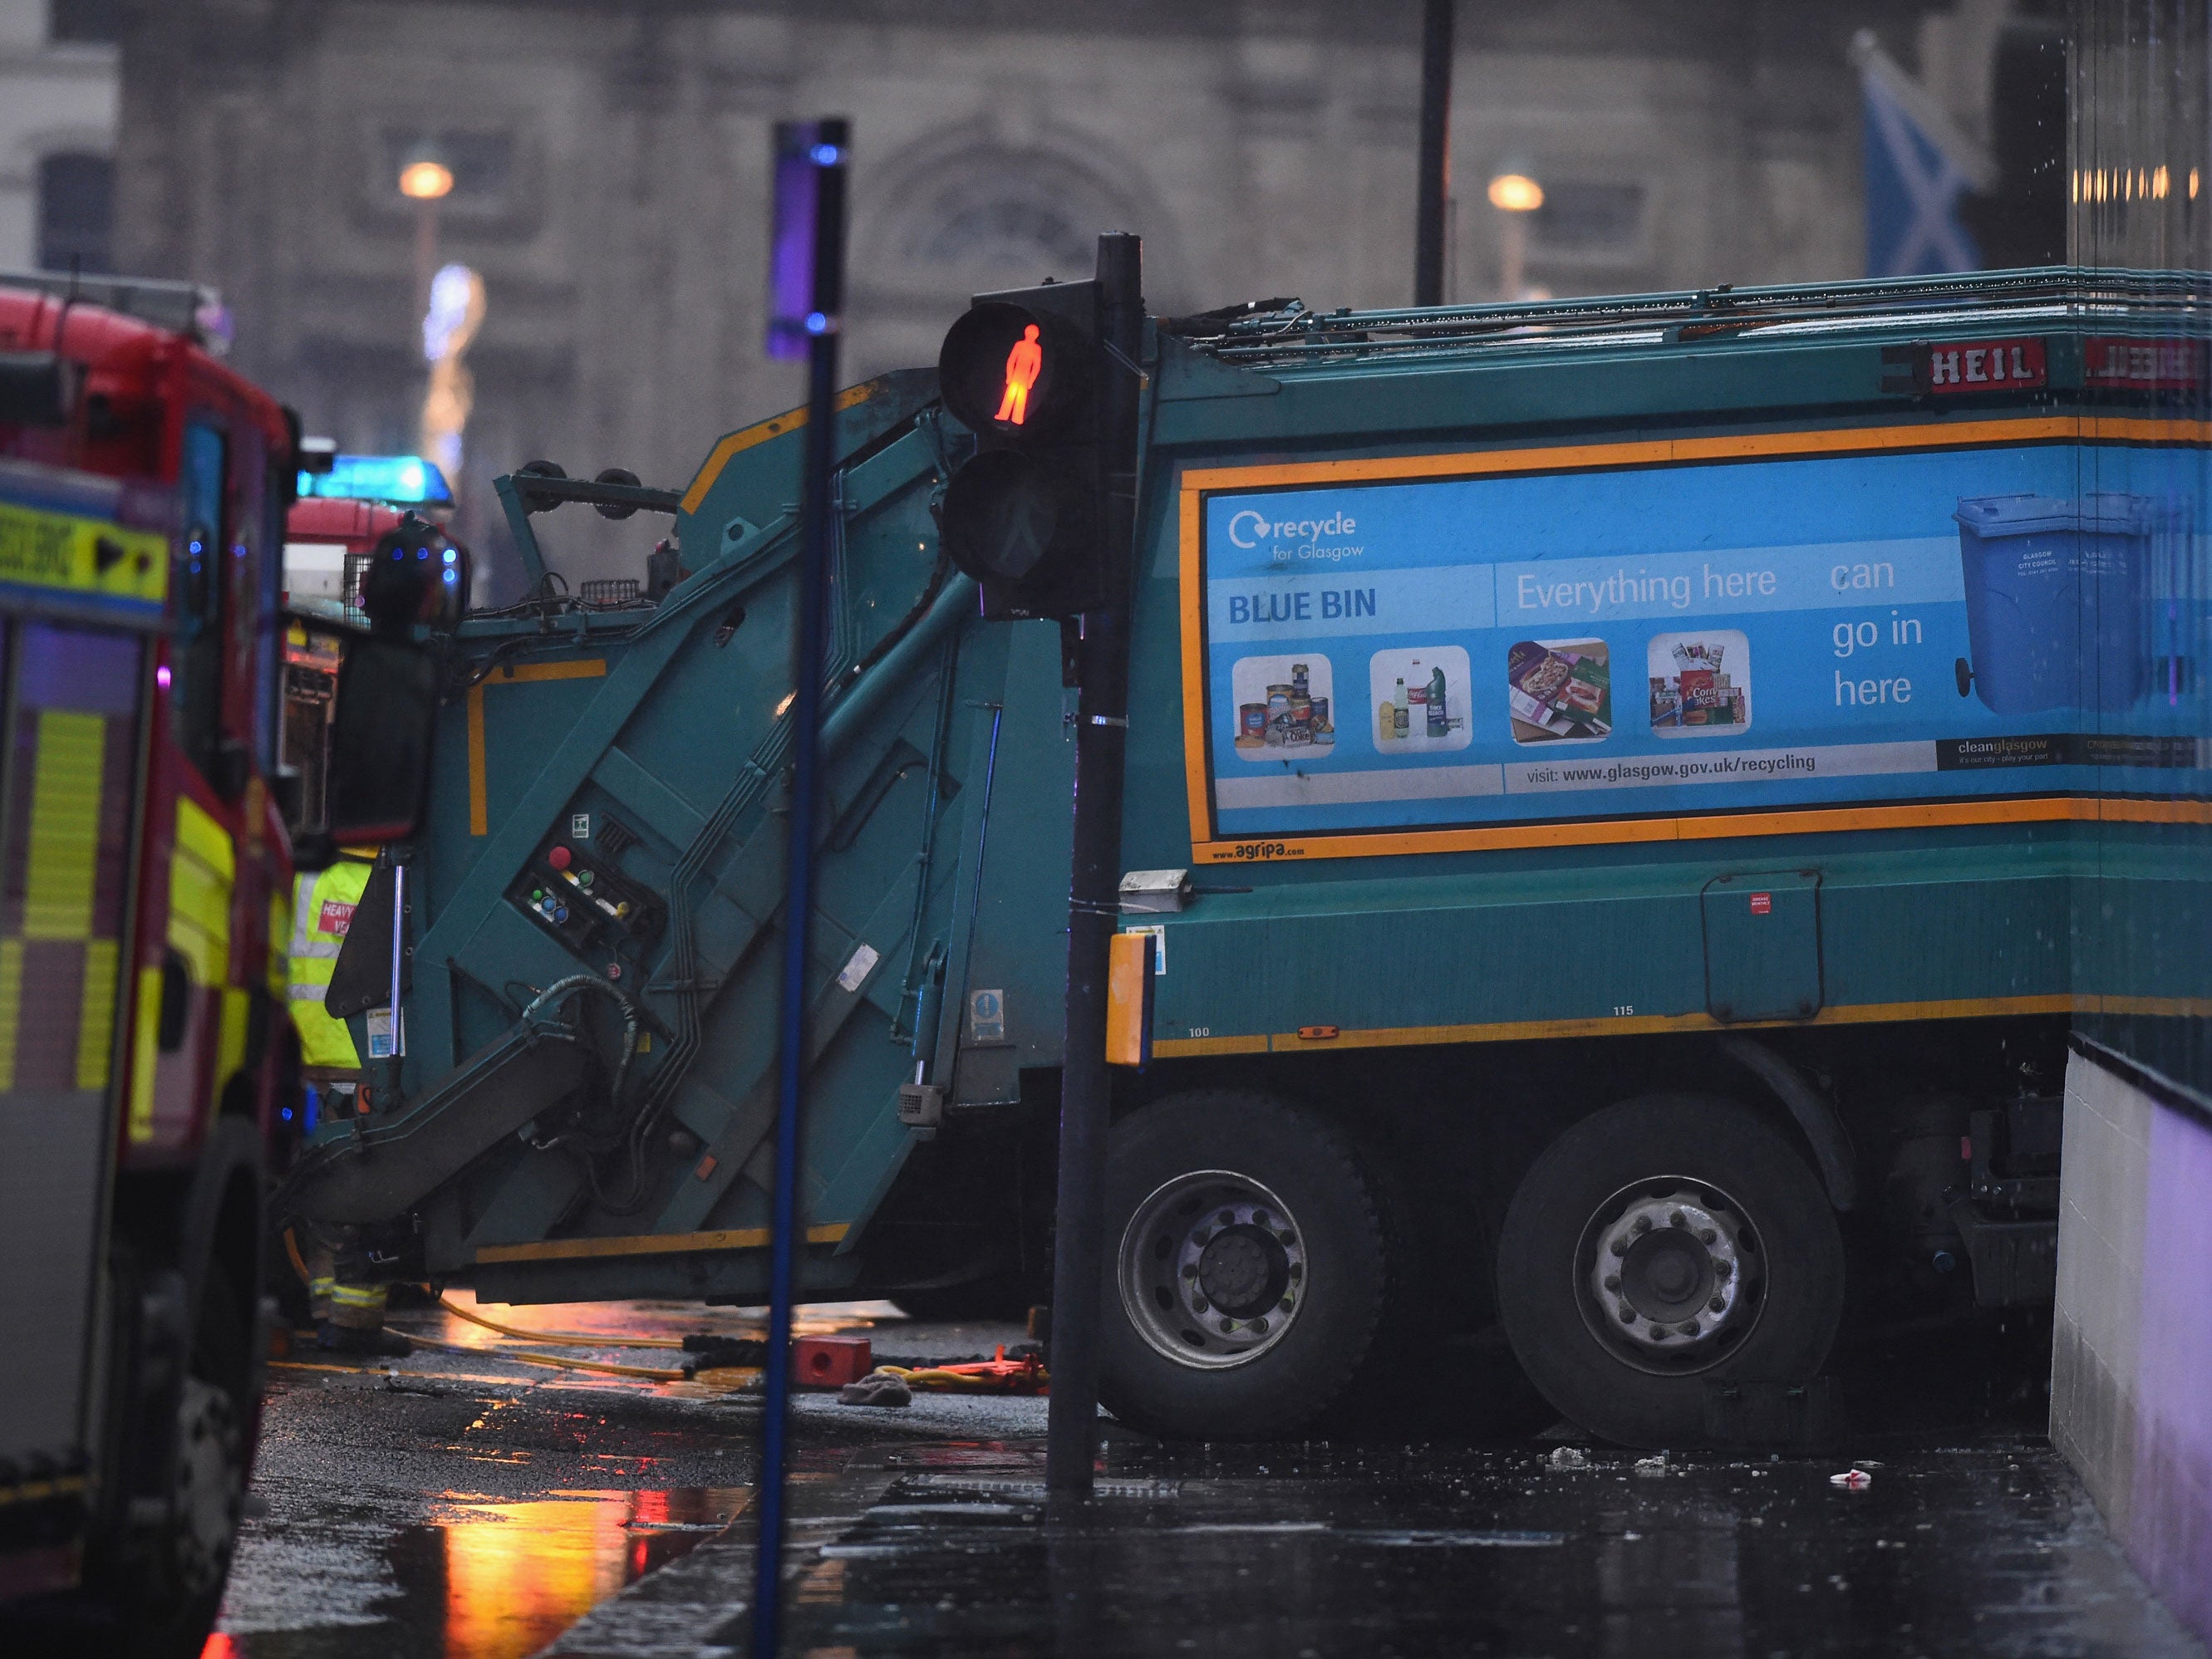 The aftermath of the bin lorry crash in Glasgow, which killed six people